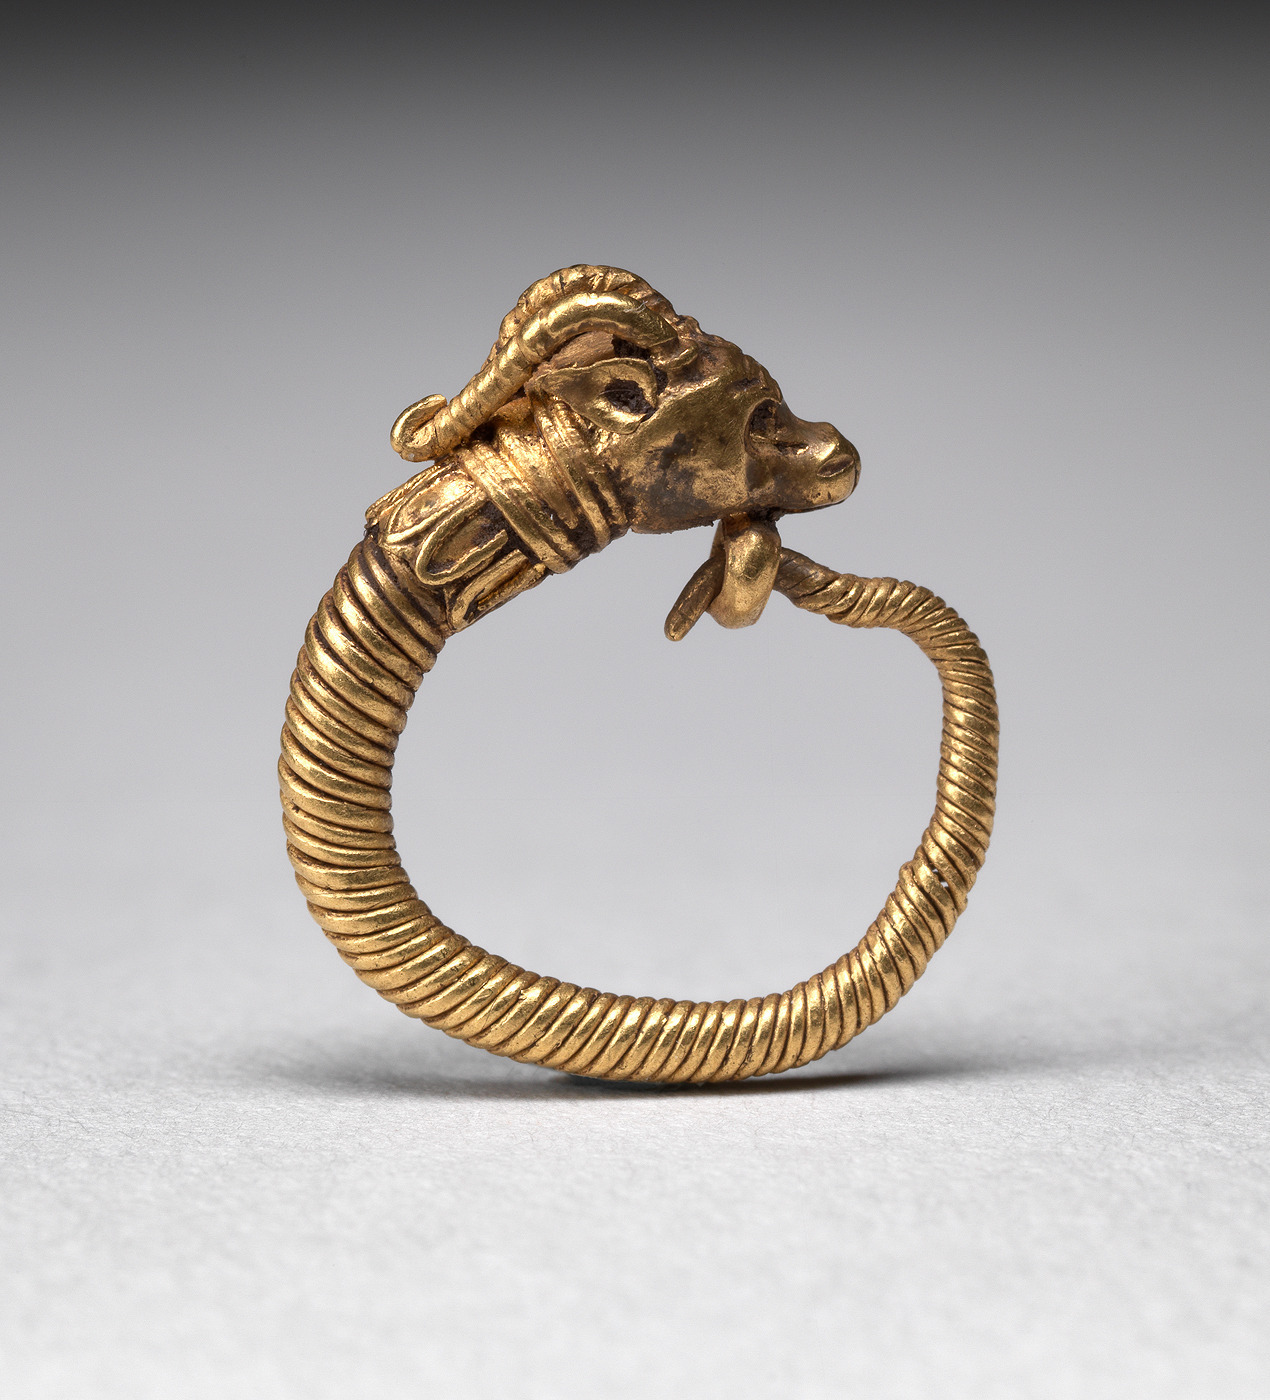 Earring with ram’s head “The god Amun was often portrayed as a ram and both were associated with creativity and virility.
Earrings were worn by men and women, both in life and after death, and were made in many different shapes, using a variety of...